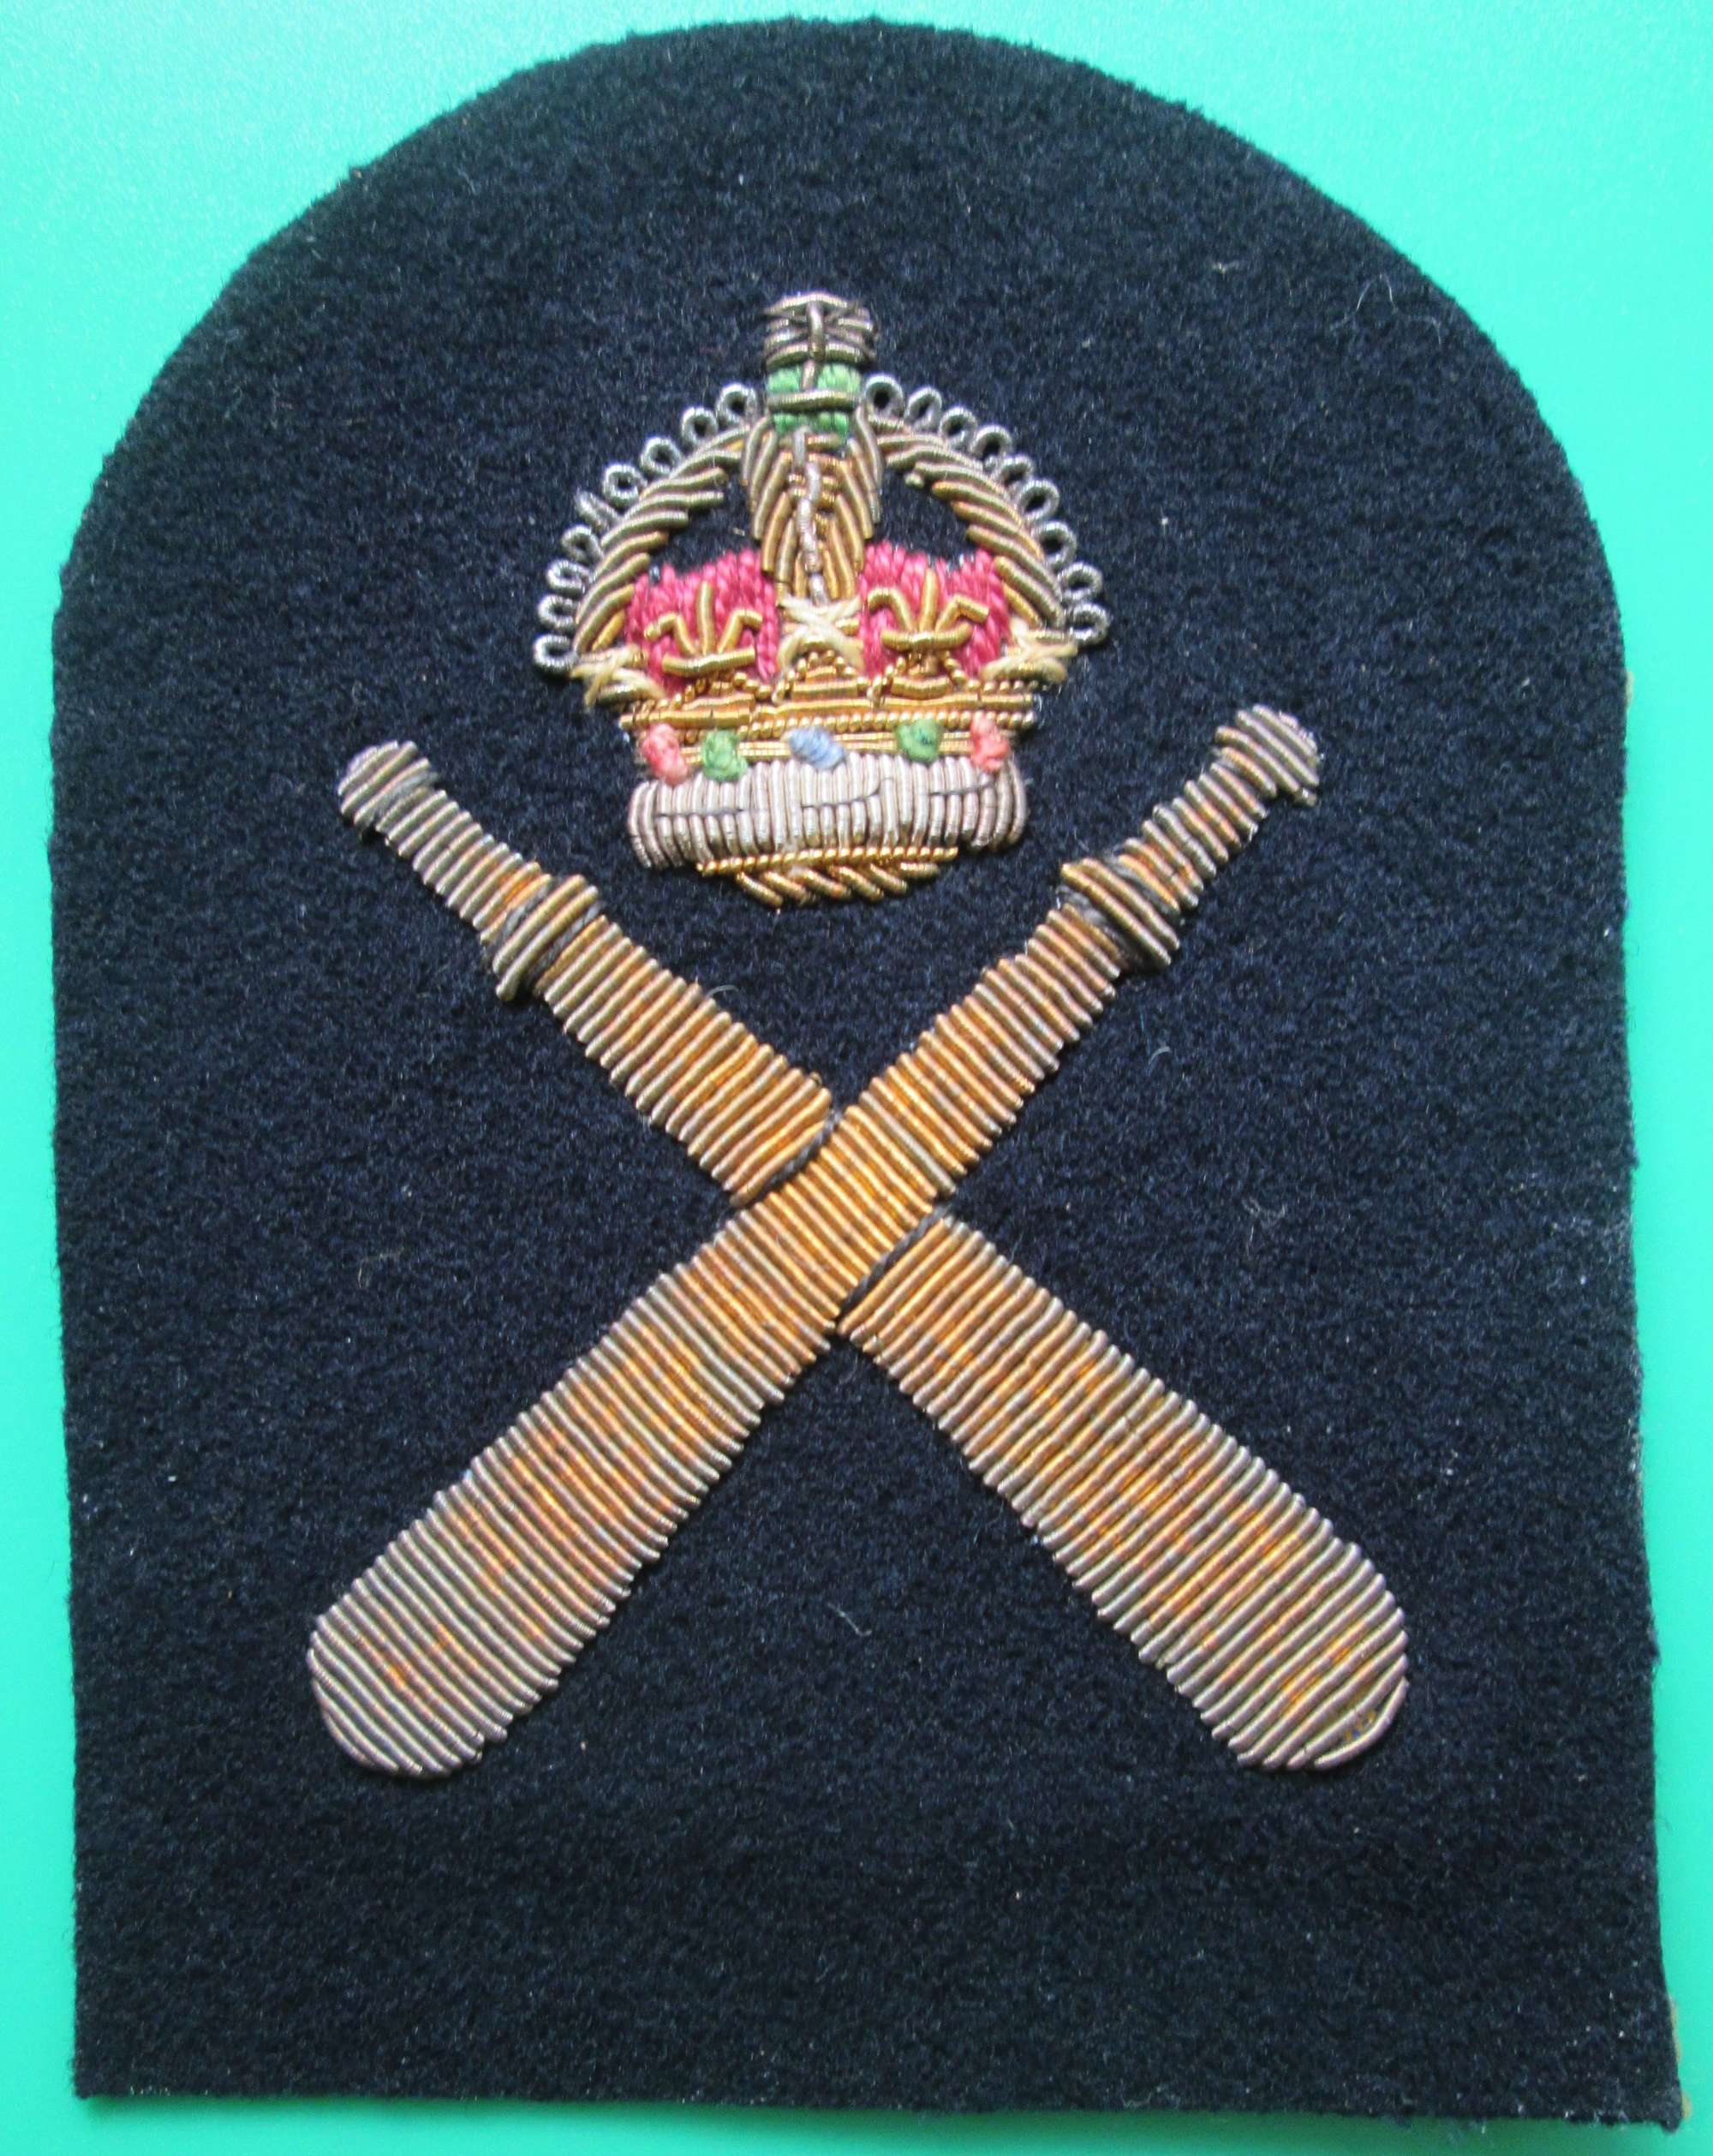 A ROYAL NAVAL PHYSICAL TRAINING LEAD RATING BADGE